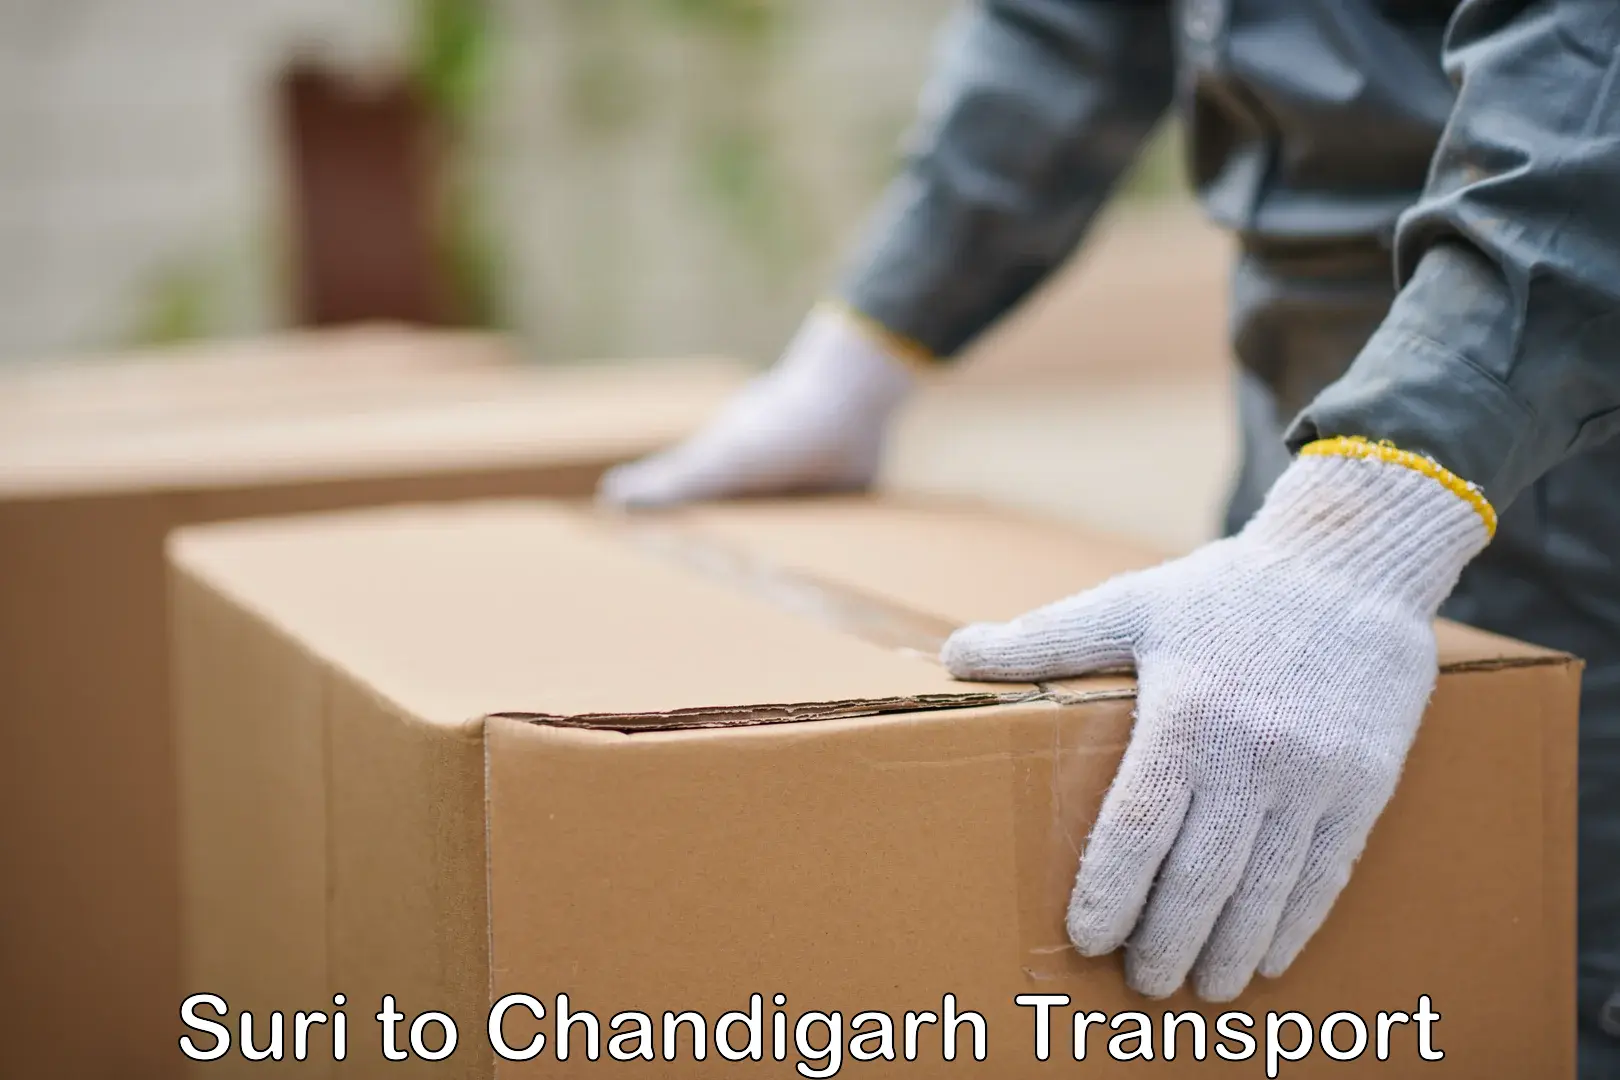 Transport bike from one state to another Suri to Chandigarh